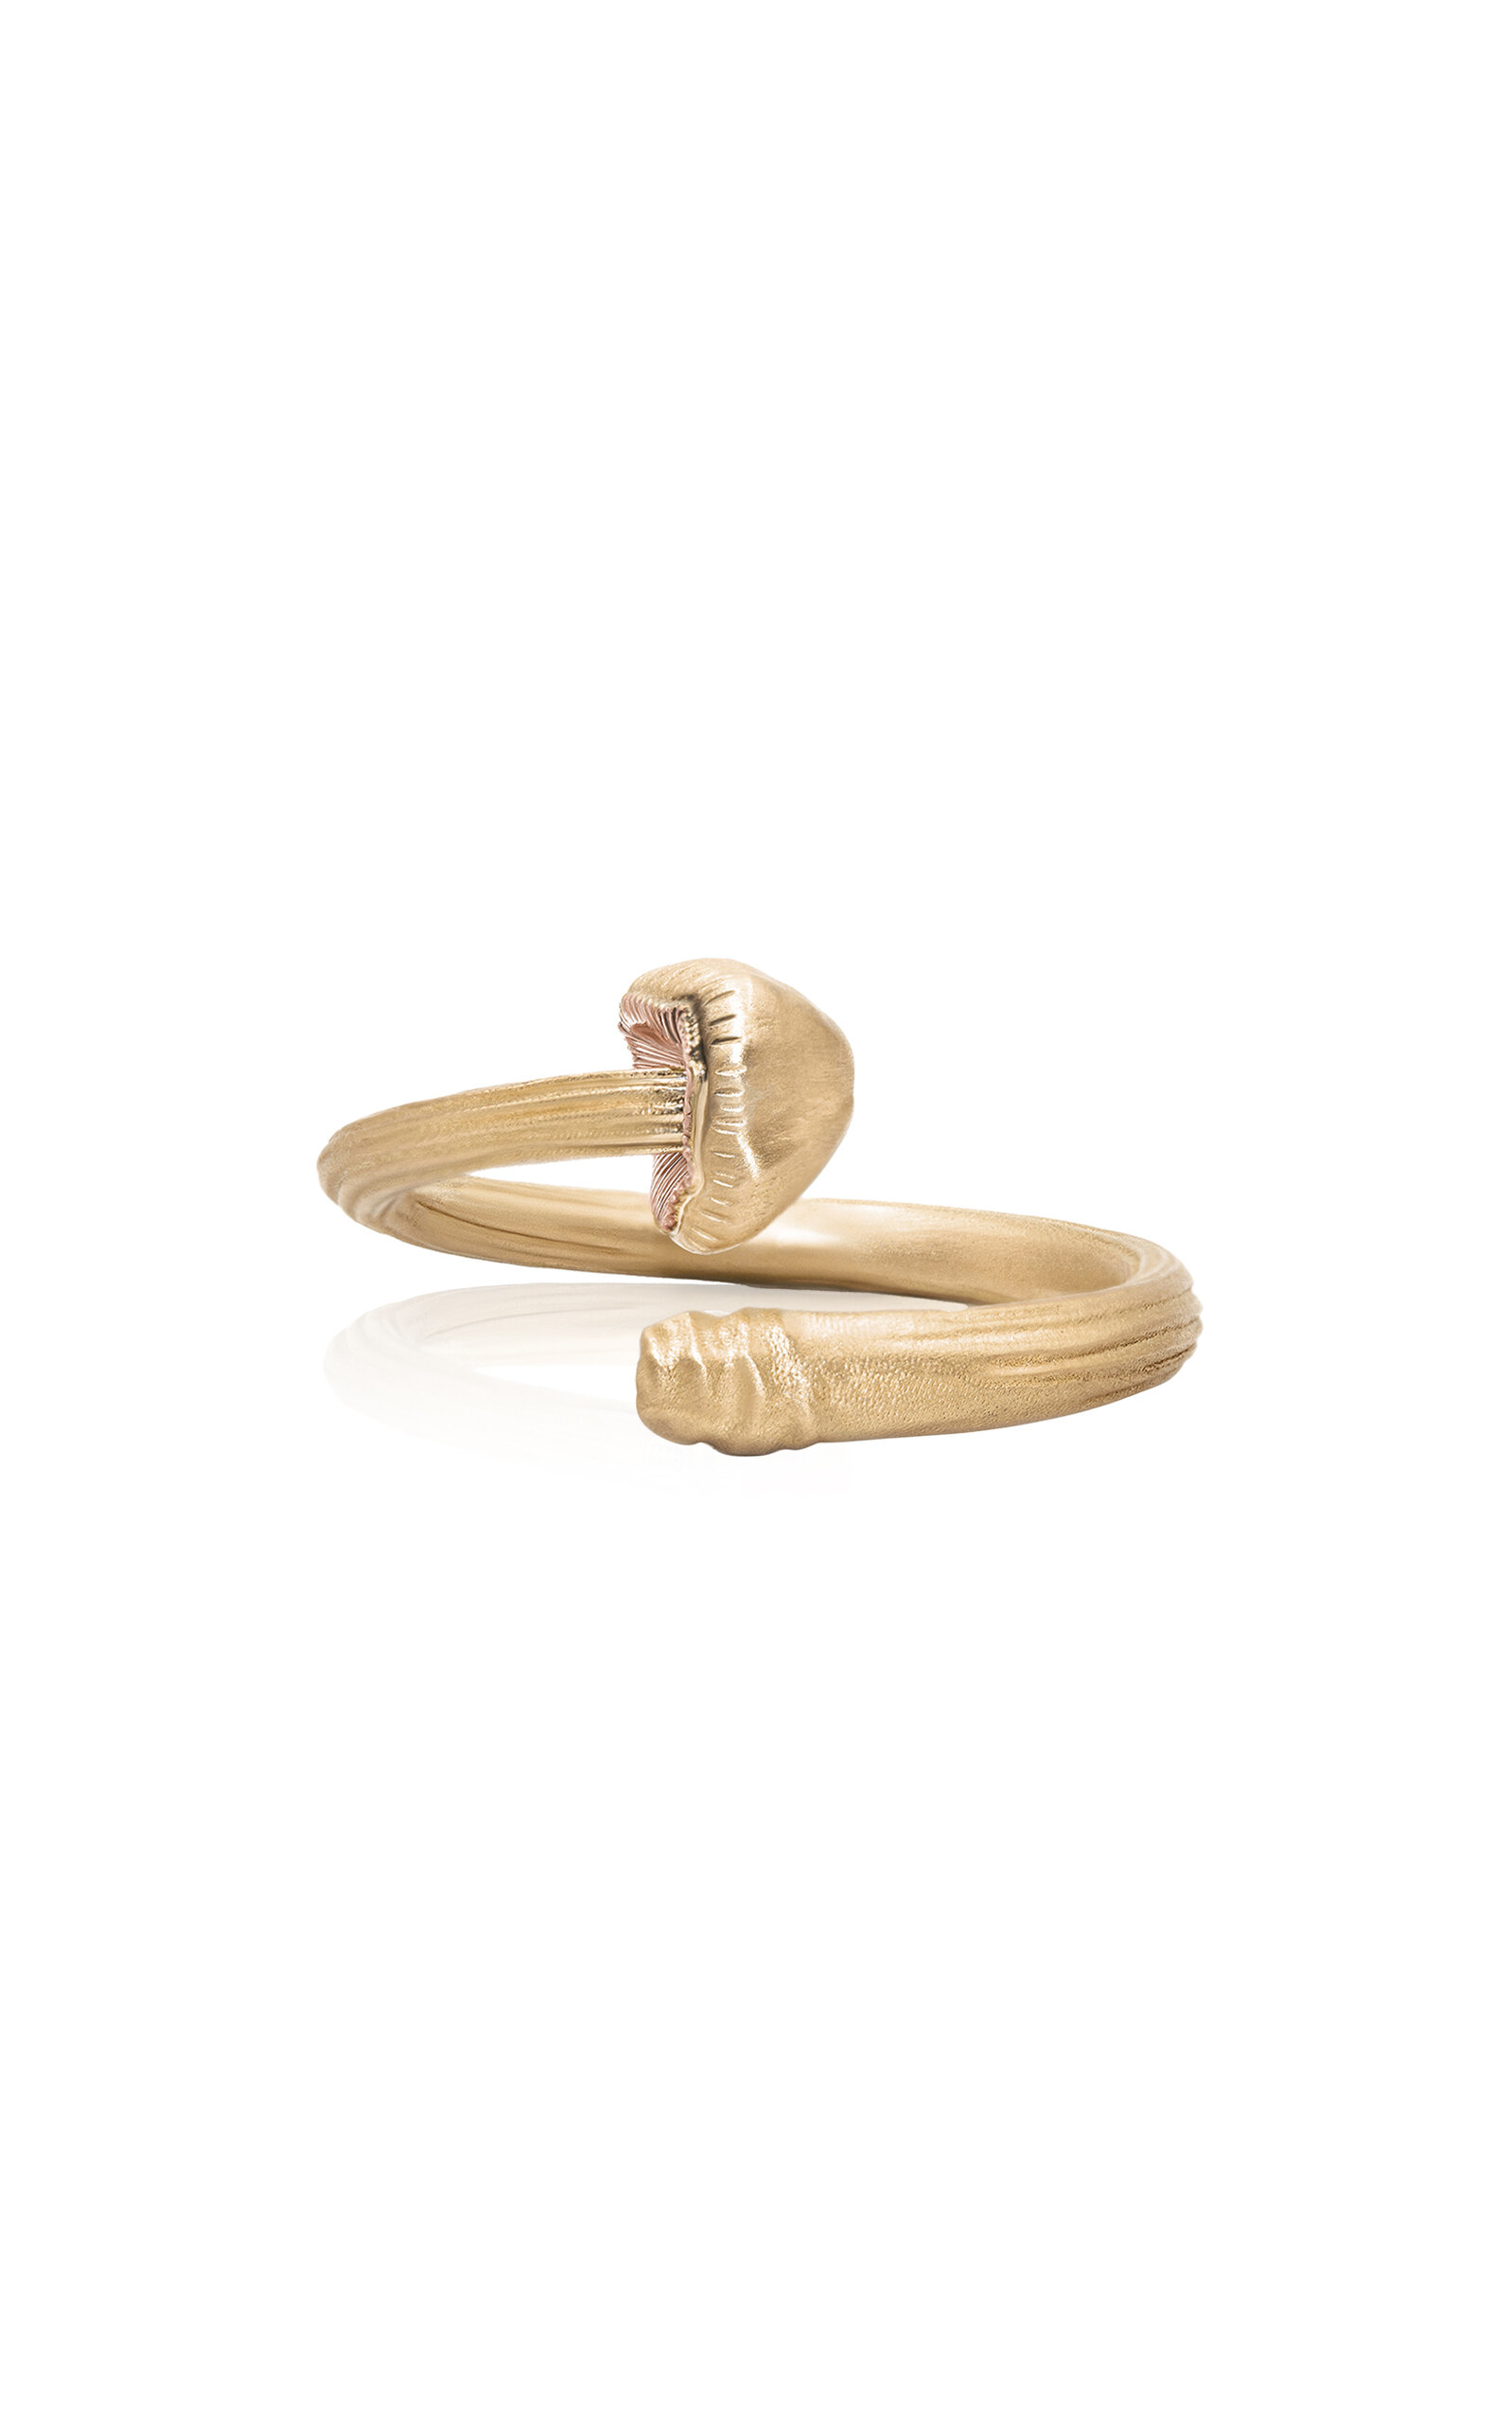 Fungi Conica 14k Yellow and Rose Gold Ring